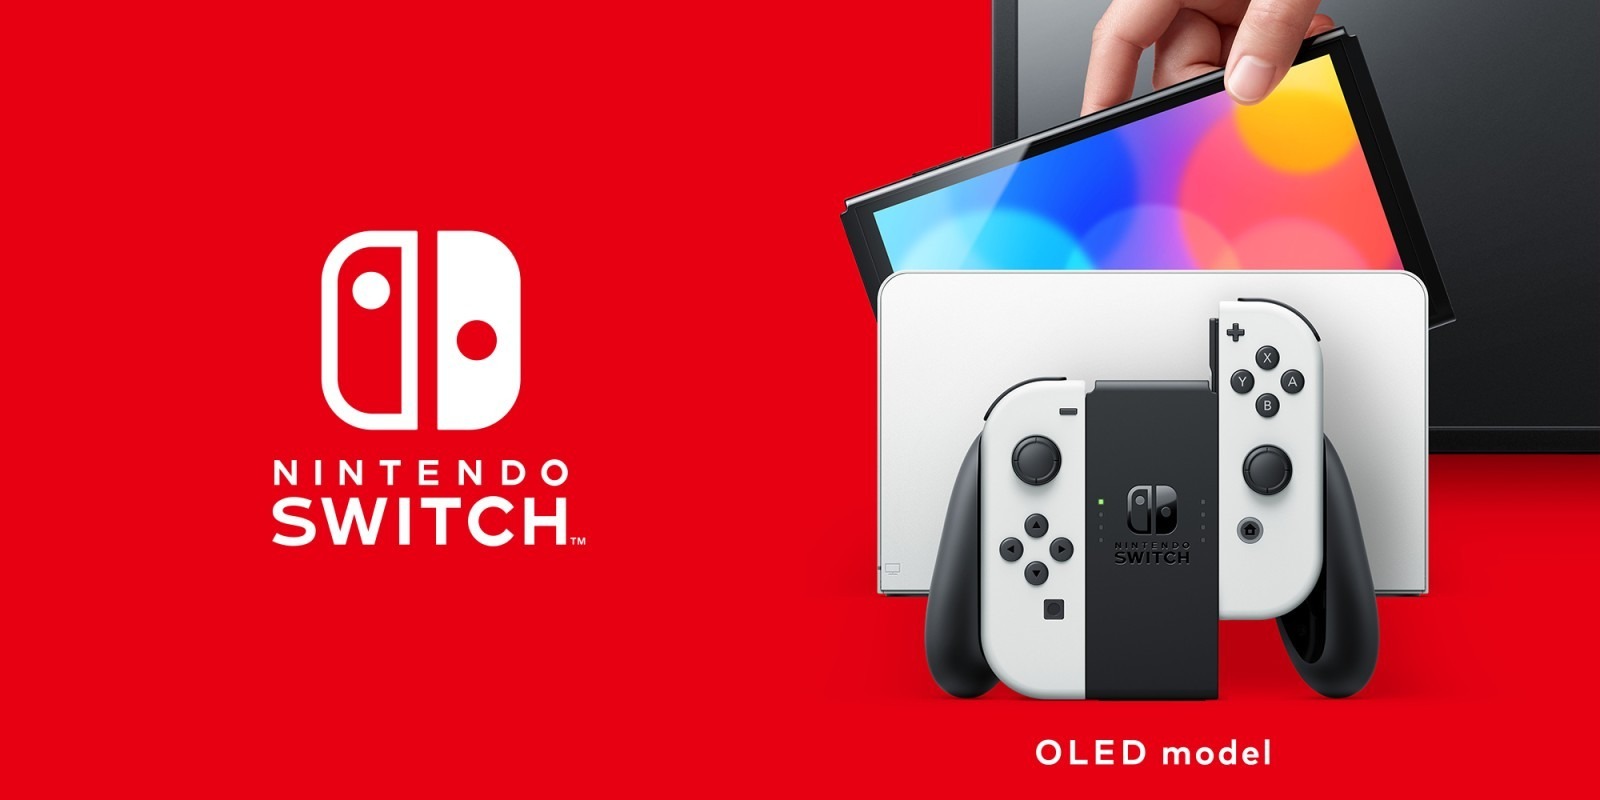 An official promotional image for the Switch (OLED) model